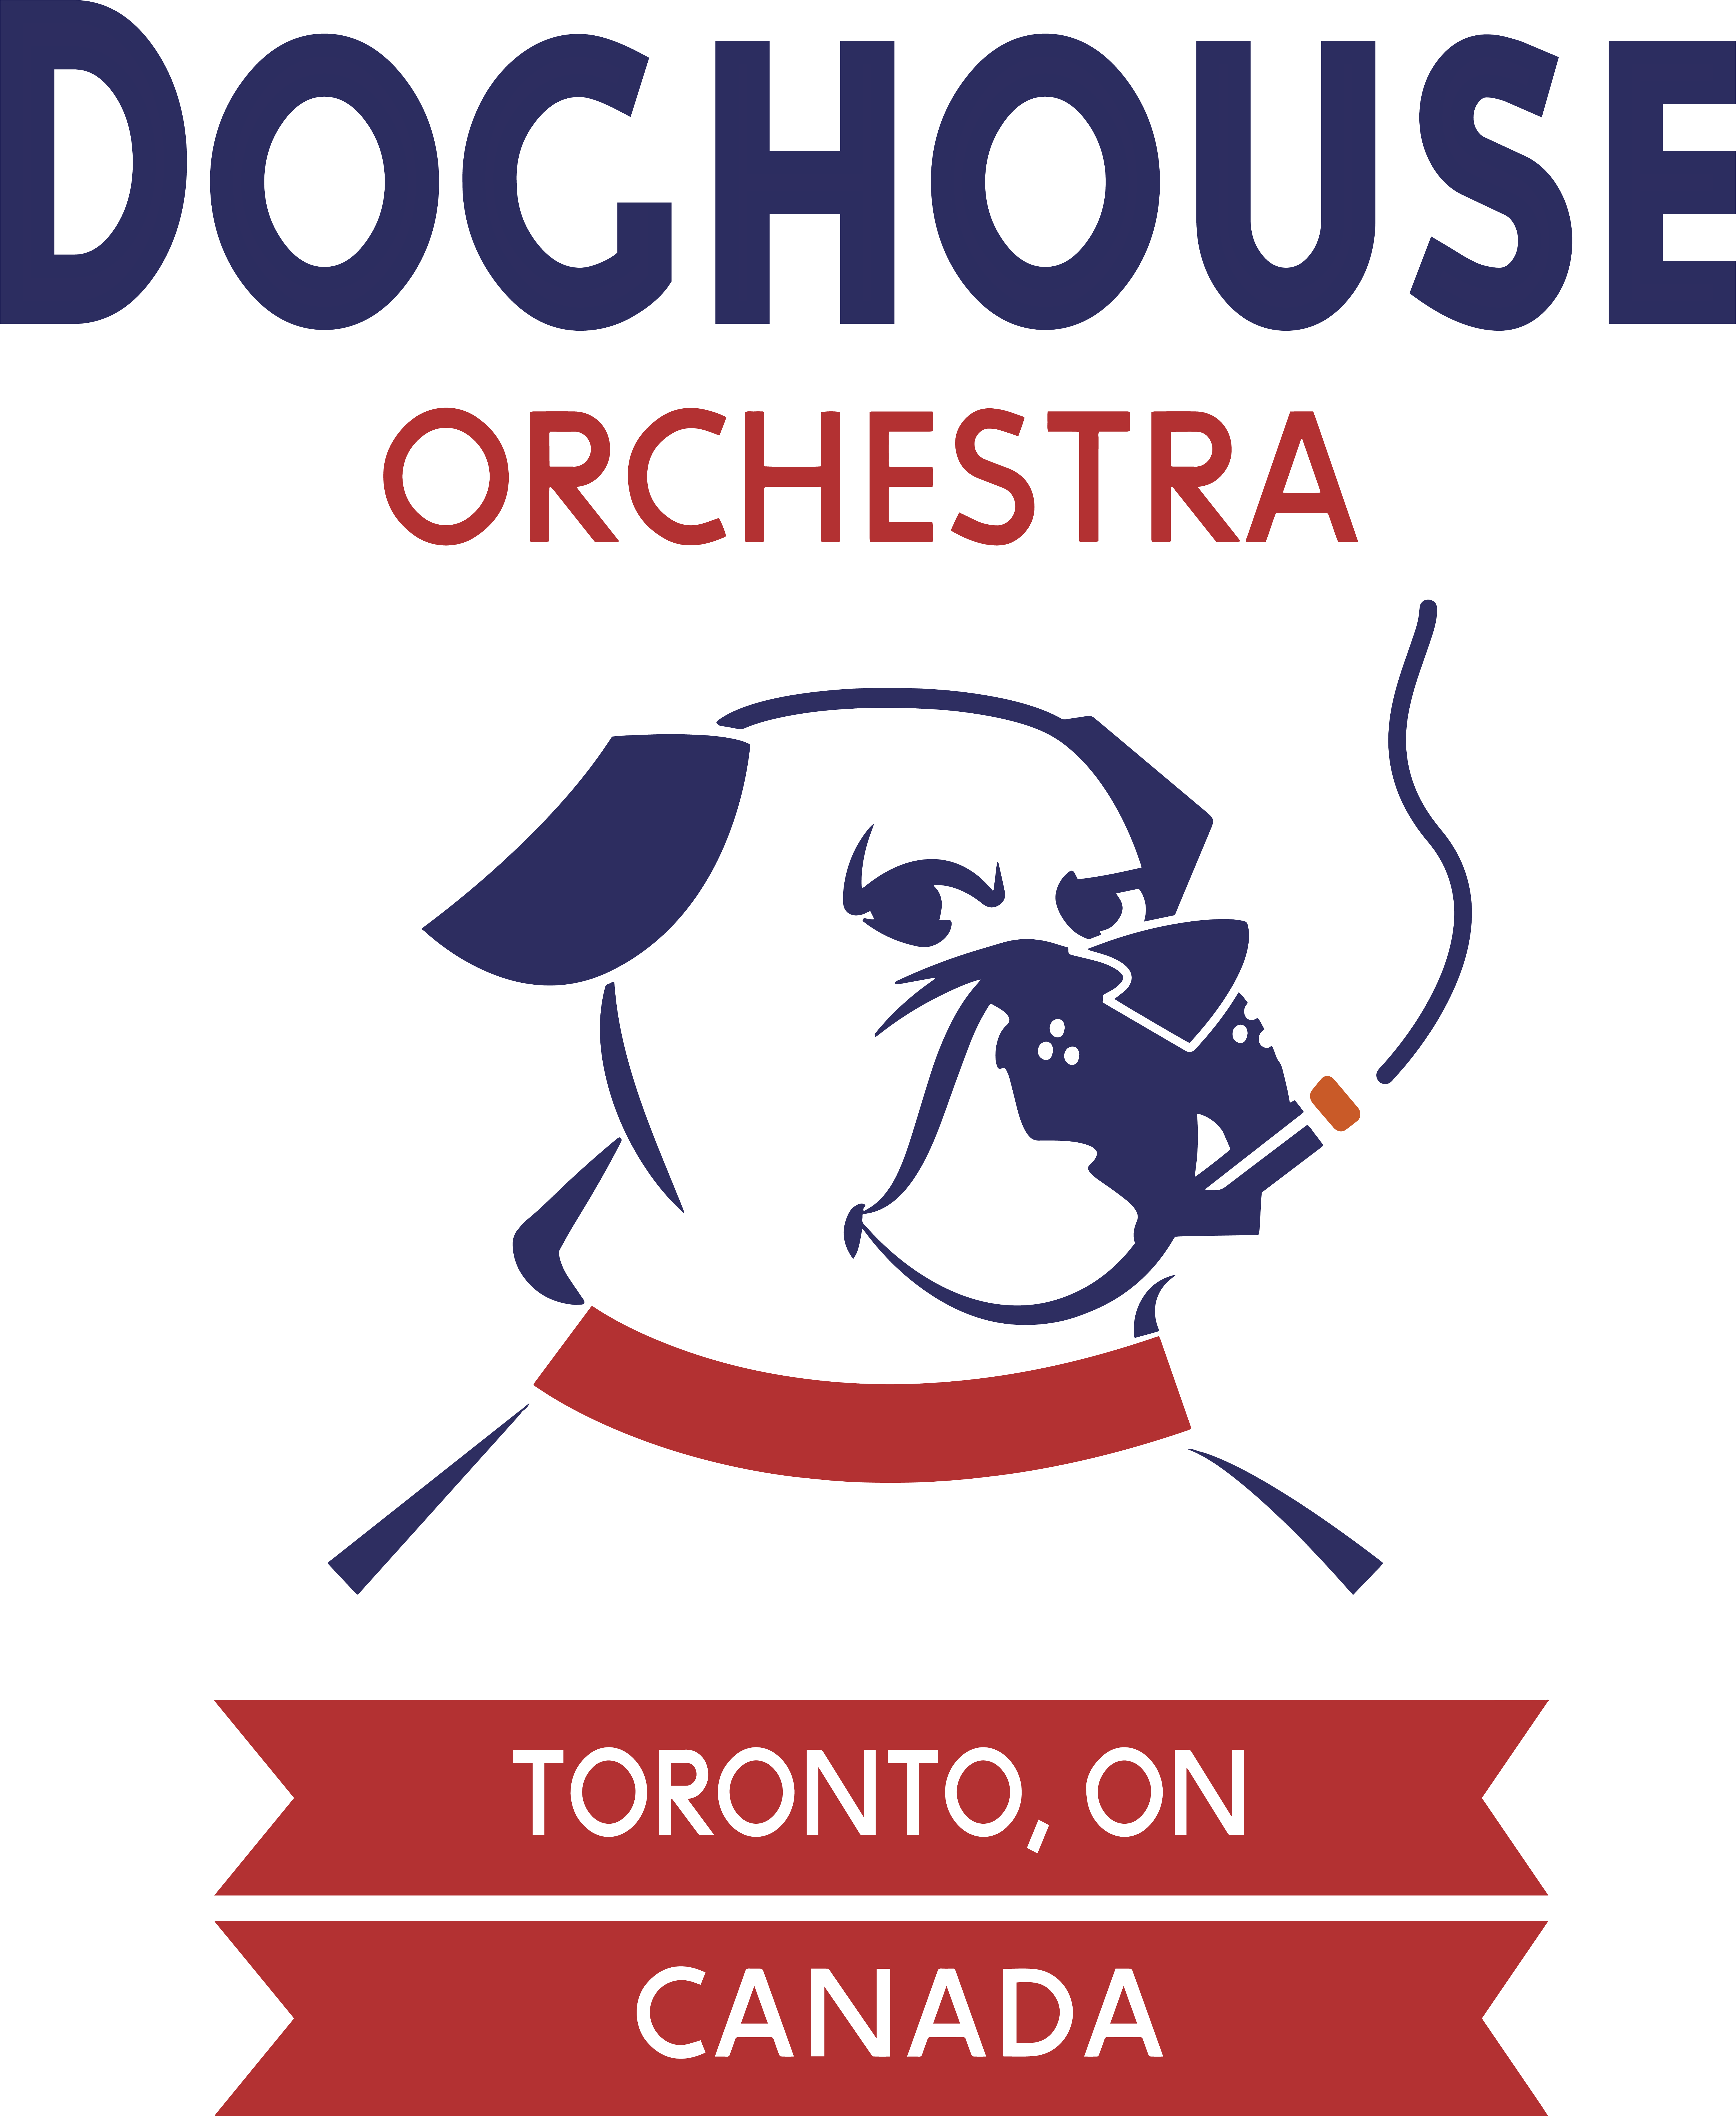 Doghouse Orchestra